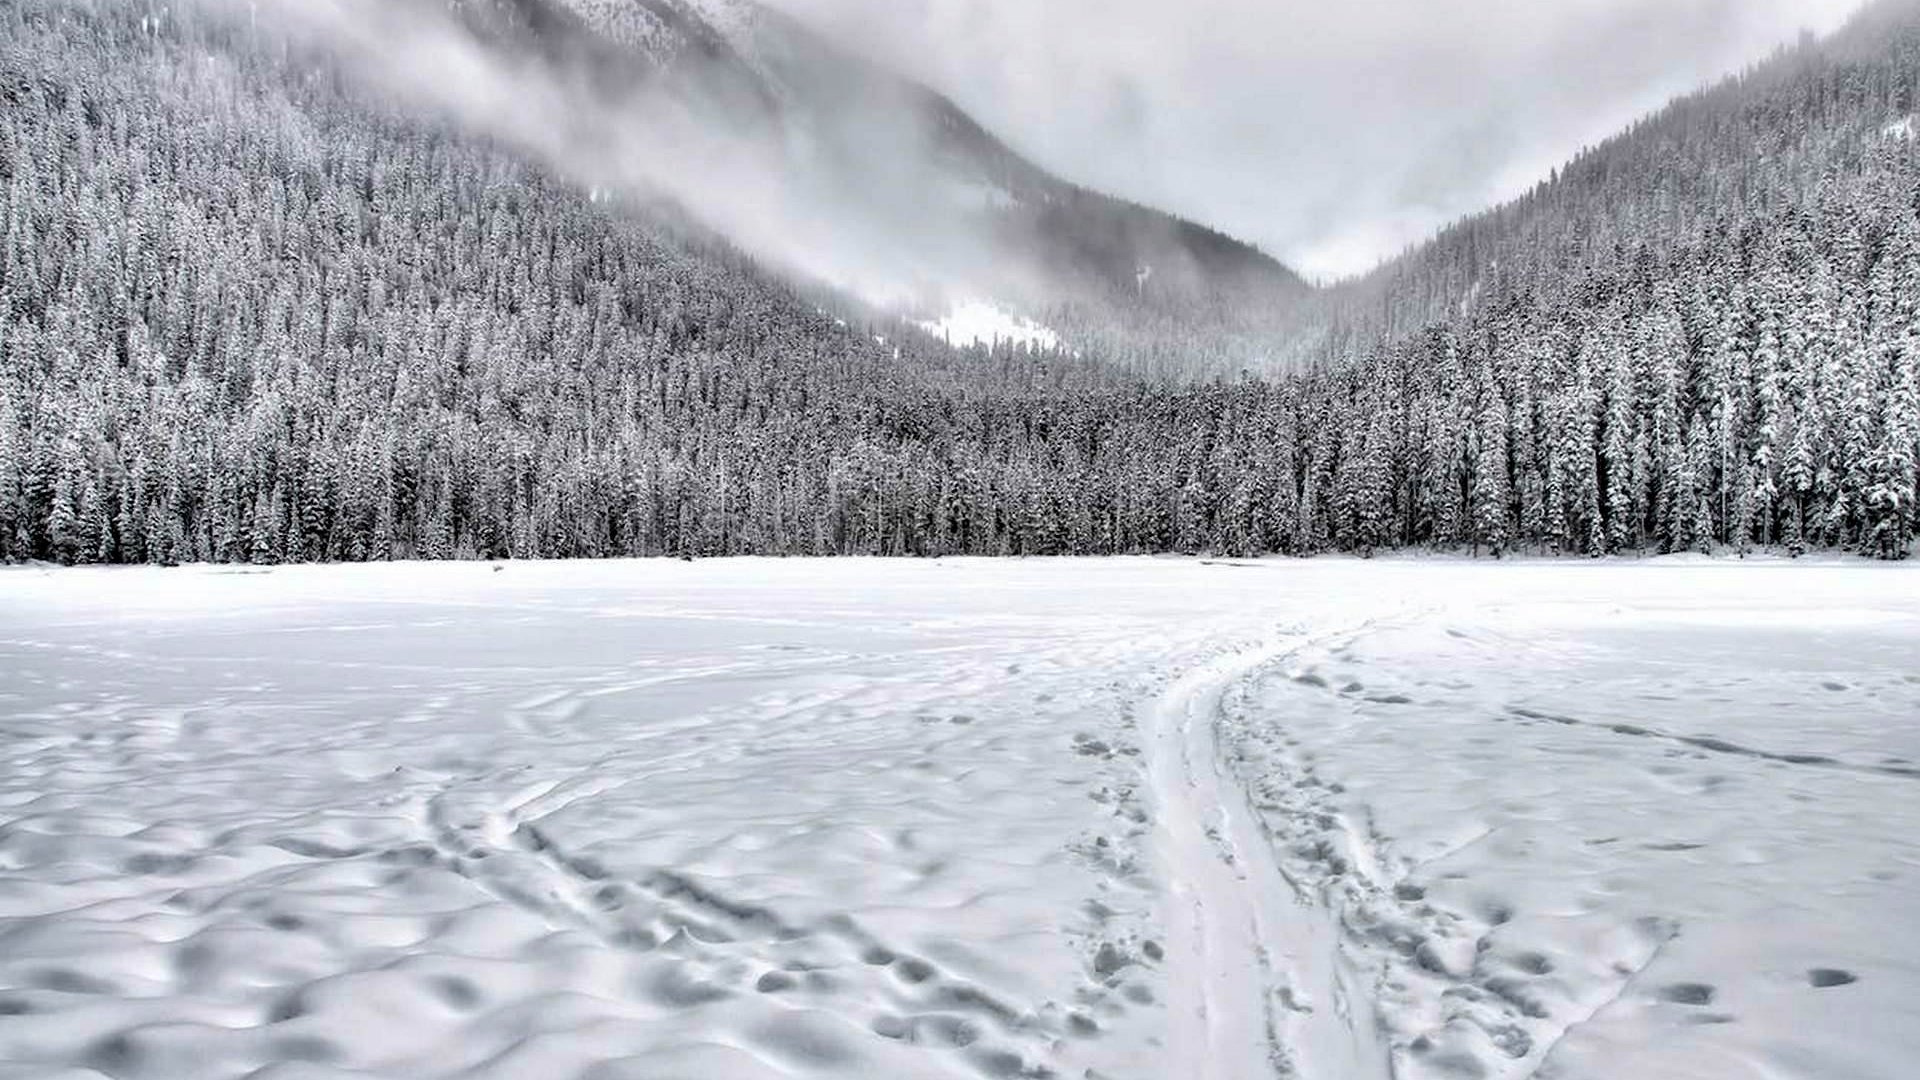 Snowshoe hike in some of the most fascinating places in the Tuscan mountains